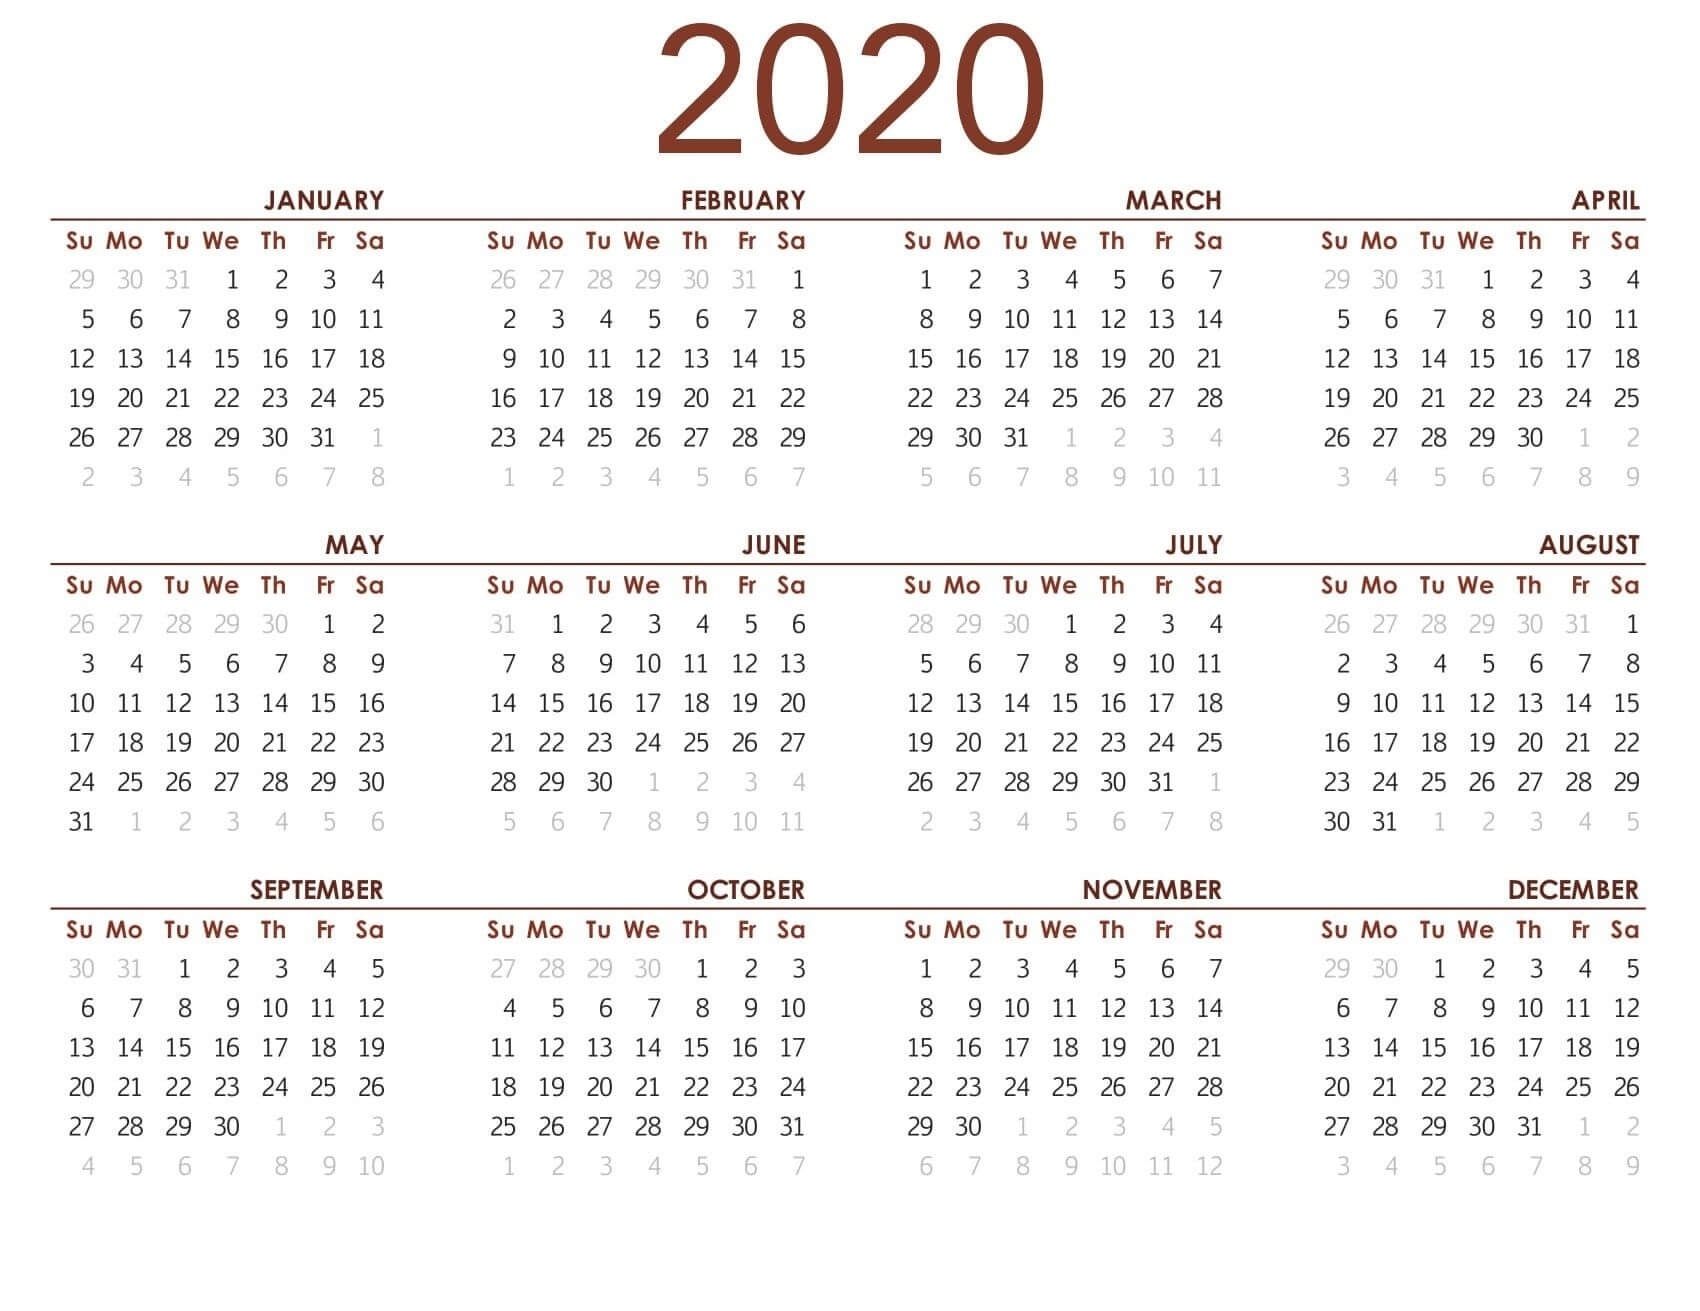 Printable Calendar 2020 With Notes - 2019 Calendars For 4 Month Calendar At A Glance To Print